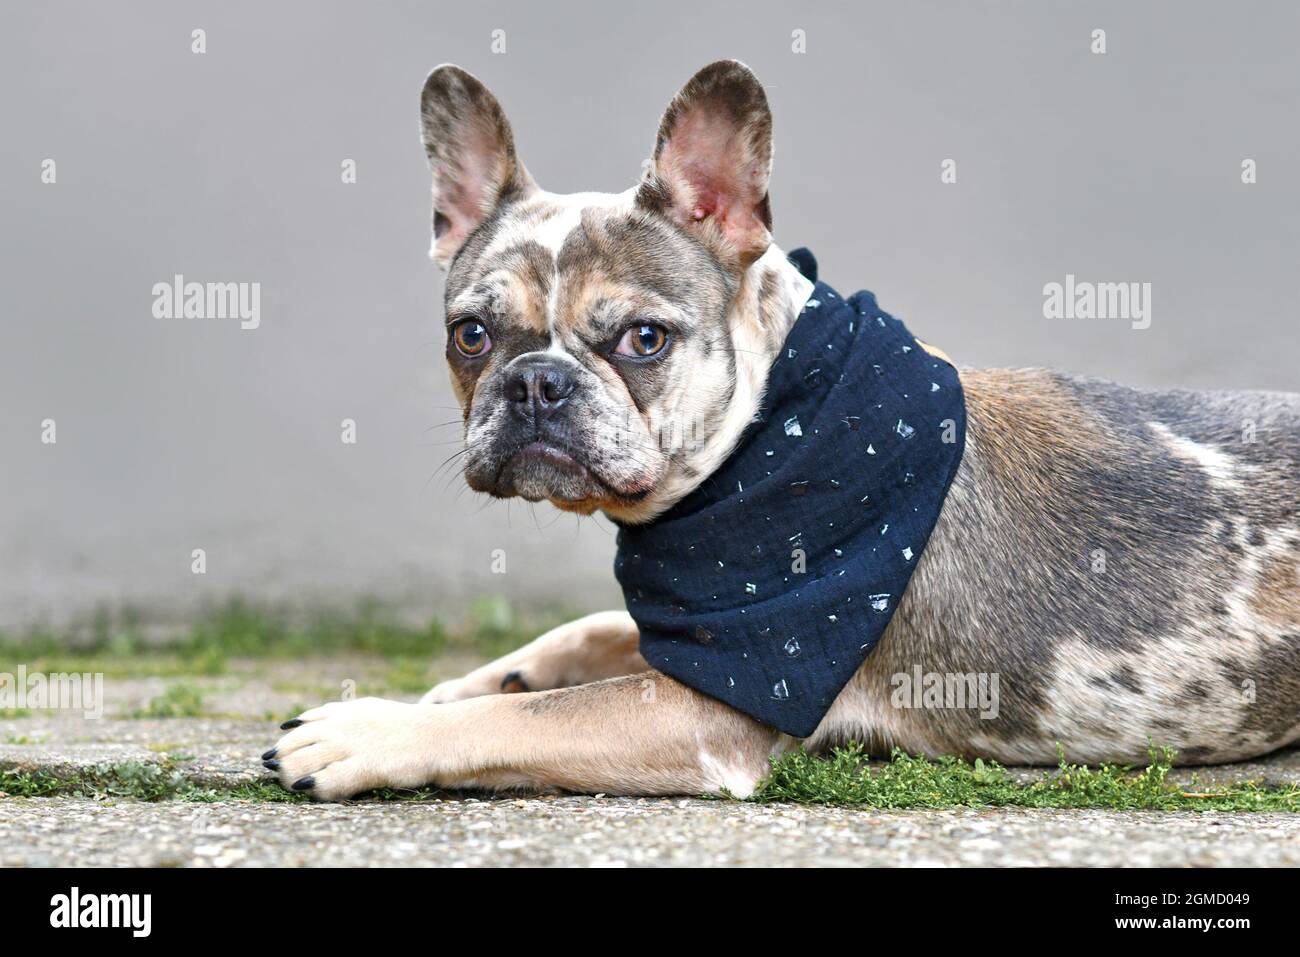 Young merle colored French Bulldog dog puppy with mottled patches wearing black neckerchief Stock Photo